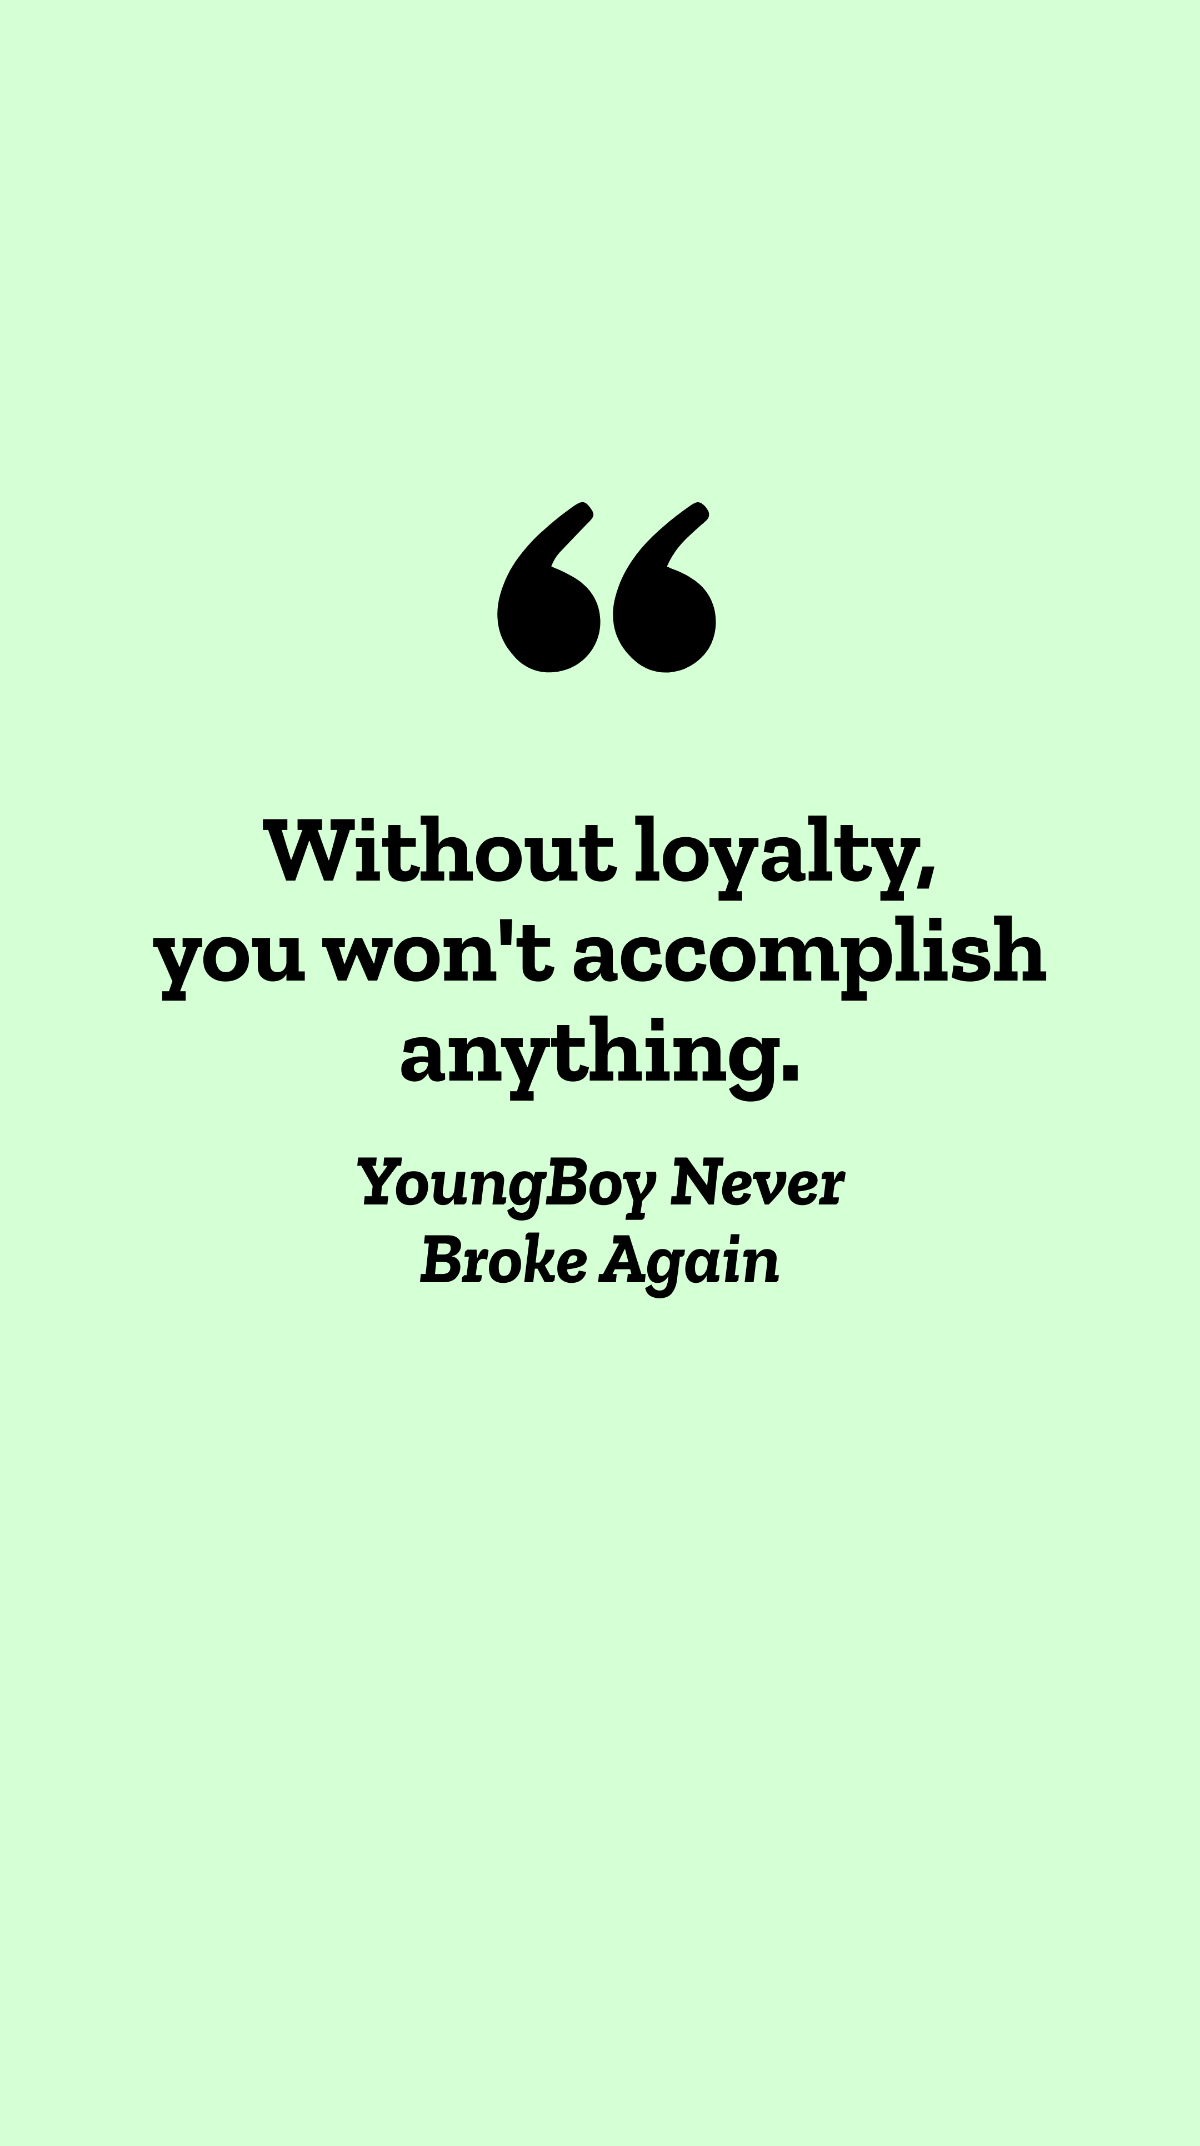 Free YoungBoy Never Broke Again - Without loyalty, you won't accomplish anything. Template